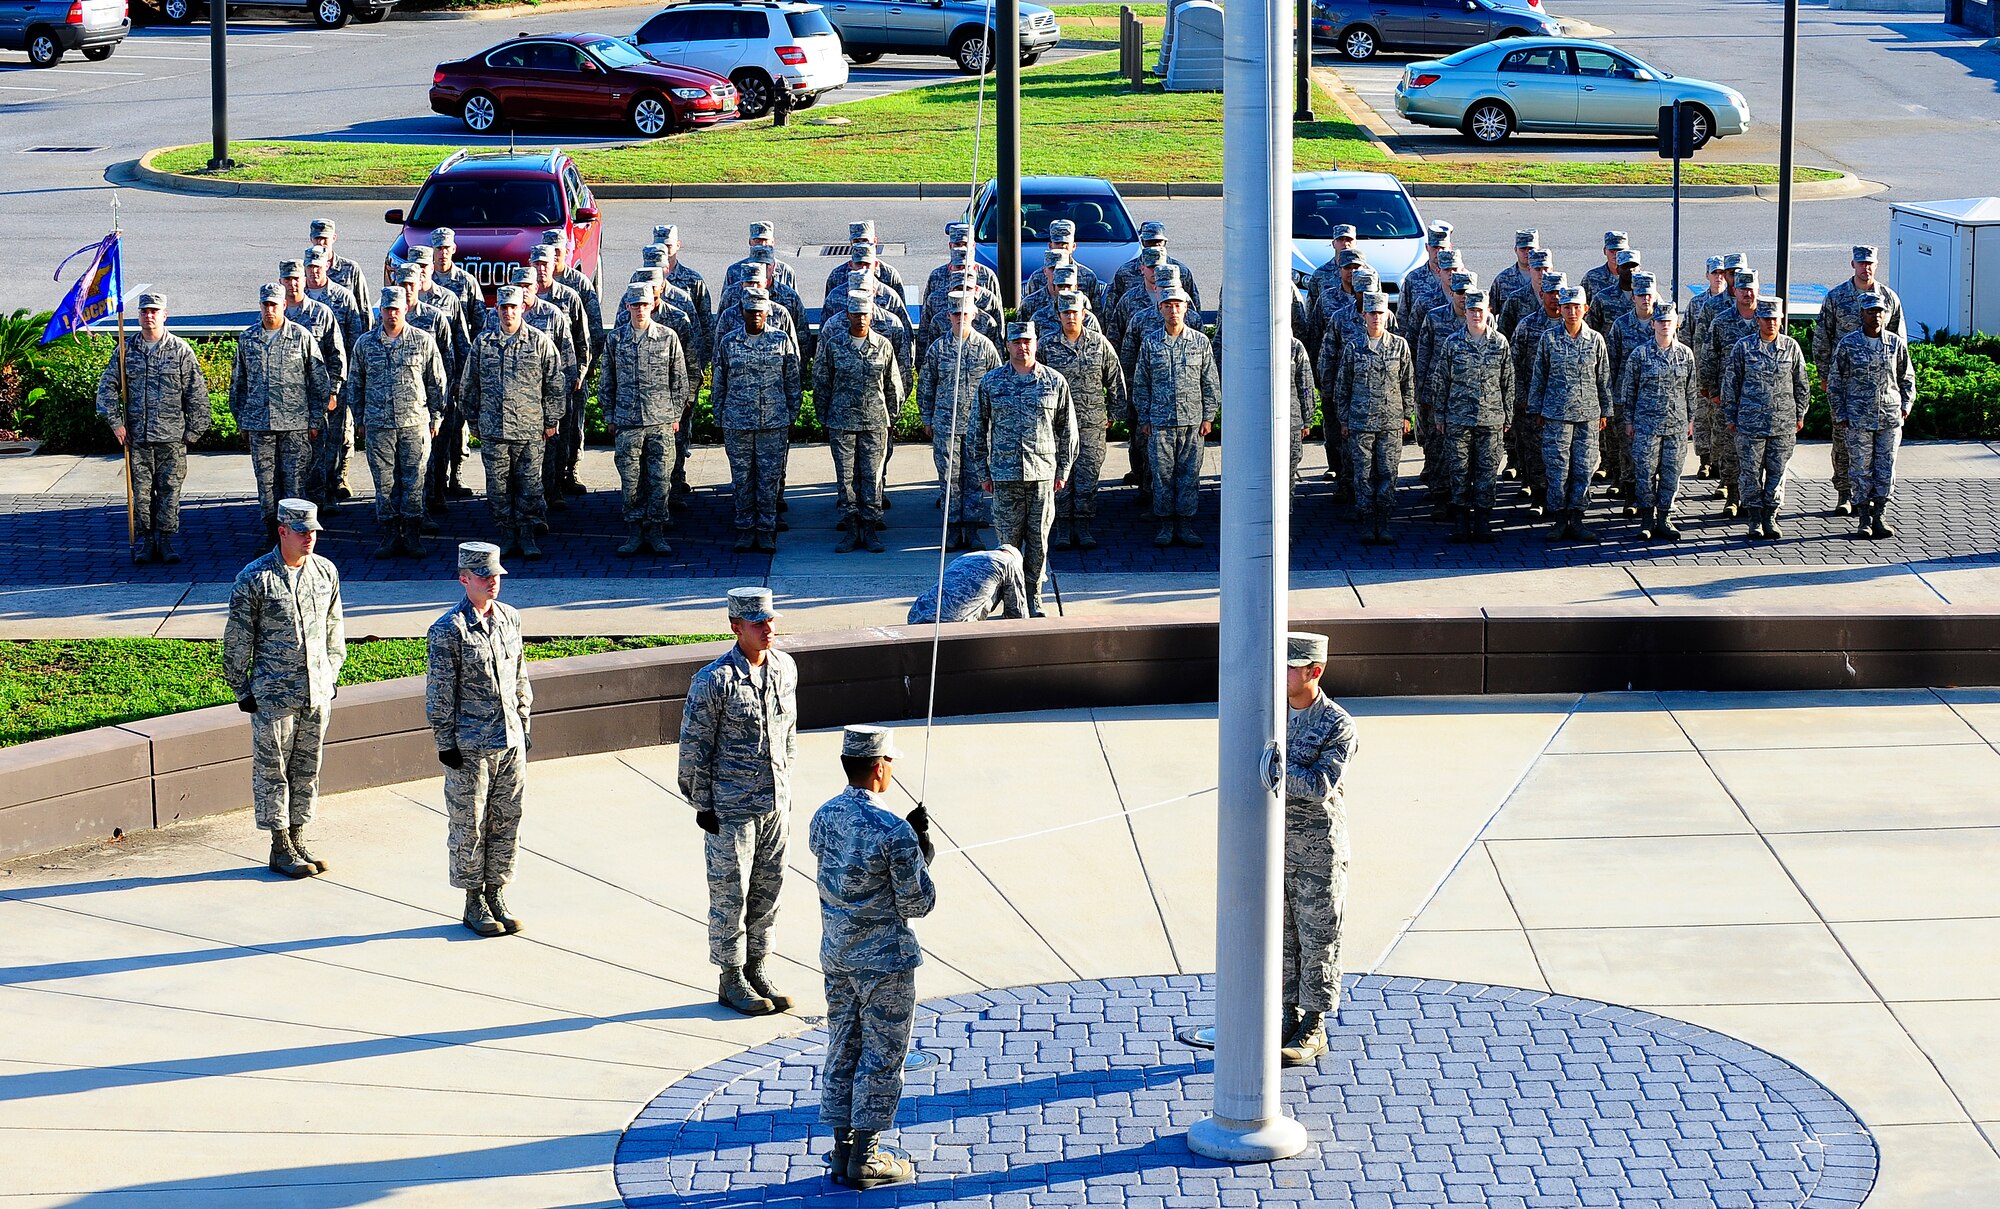 Members of the 1st Special Operations Wing, Wing Staff Agency and members of the Honor Guard conduct a retreat ceremony at the wing headquarters building at on Hurlburt Field, Fla., Oct. 8, 2014. Retreat is a 122-second ceremony carried out every day by honor guard personnel and base members to end the duty day. (U.S. Air Force photo/Airman 1st Class Andrea Posey)